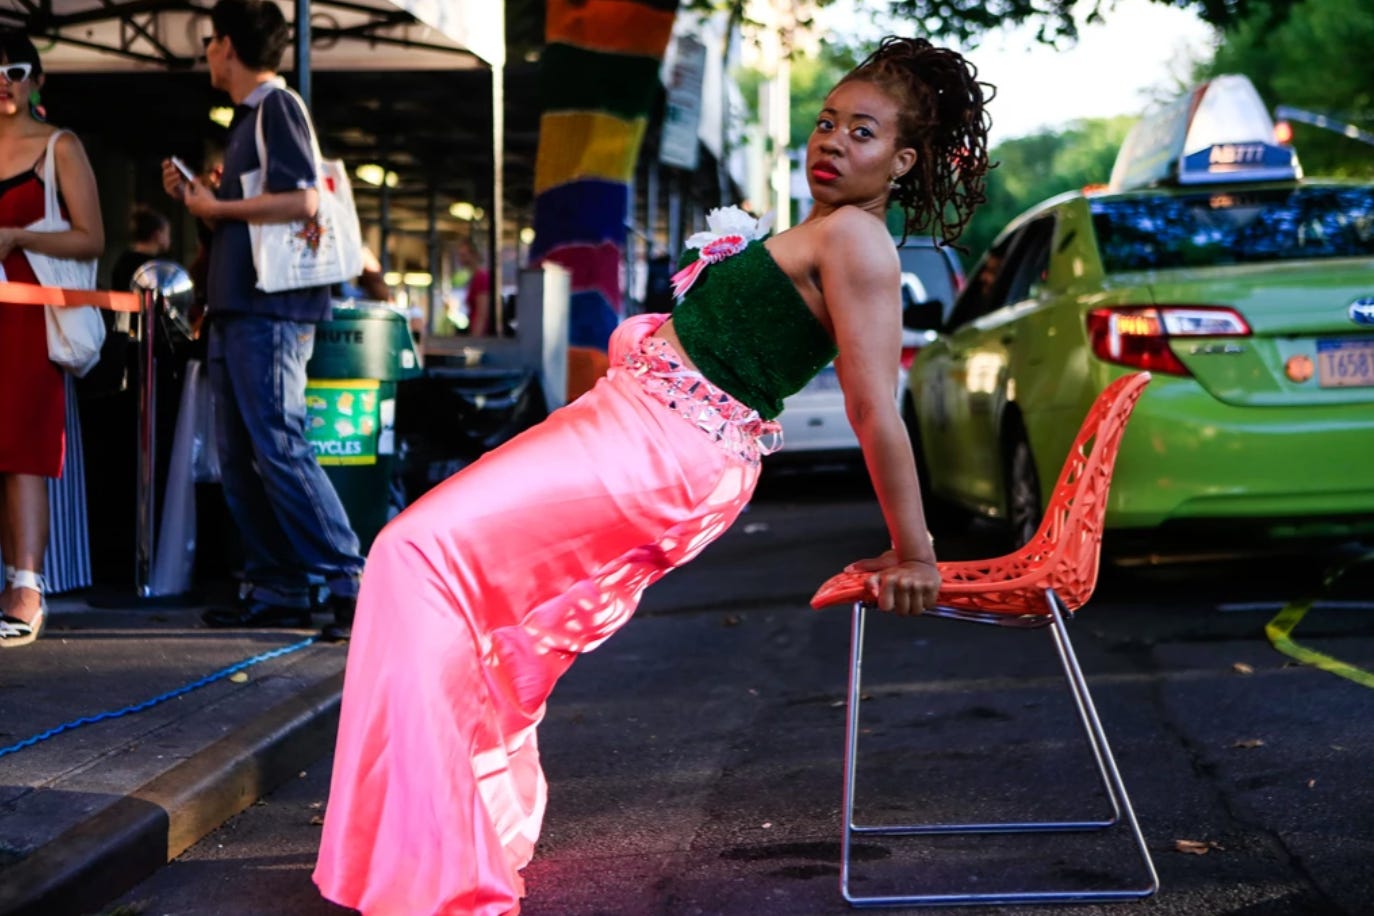 The artist wears a bright pink skirt and dark green top while looking forward. She is in the middle of performing bicep dips over a red chair on the middle of the street in New York. A green taxi drives off behind her on the road 